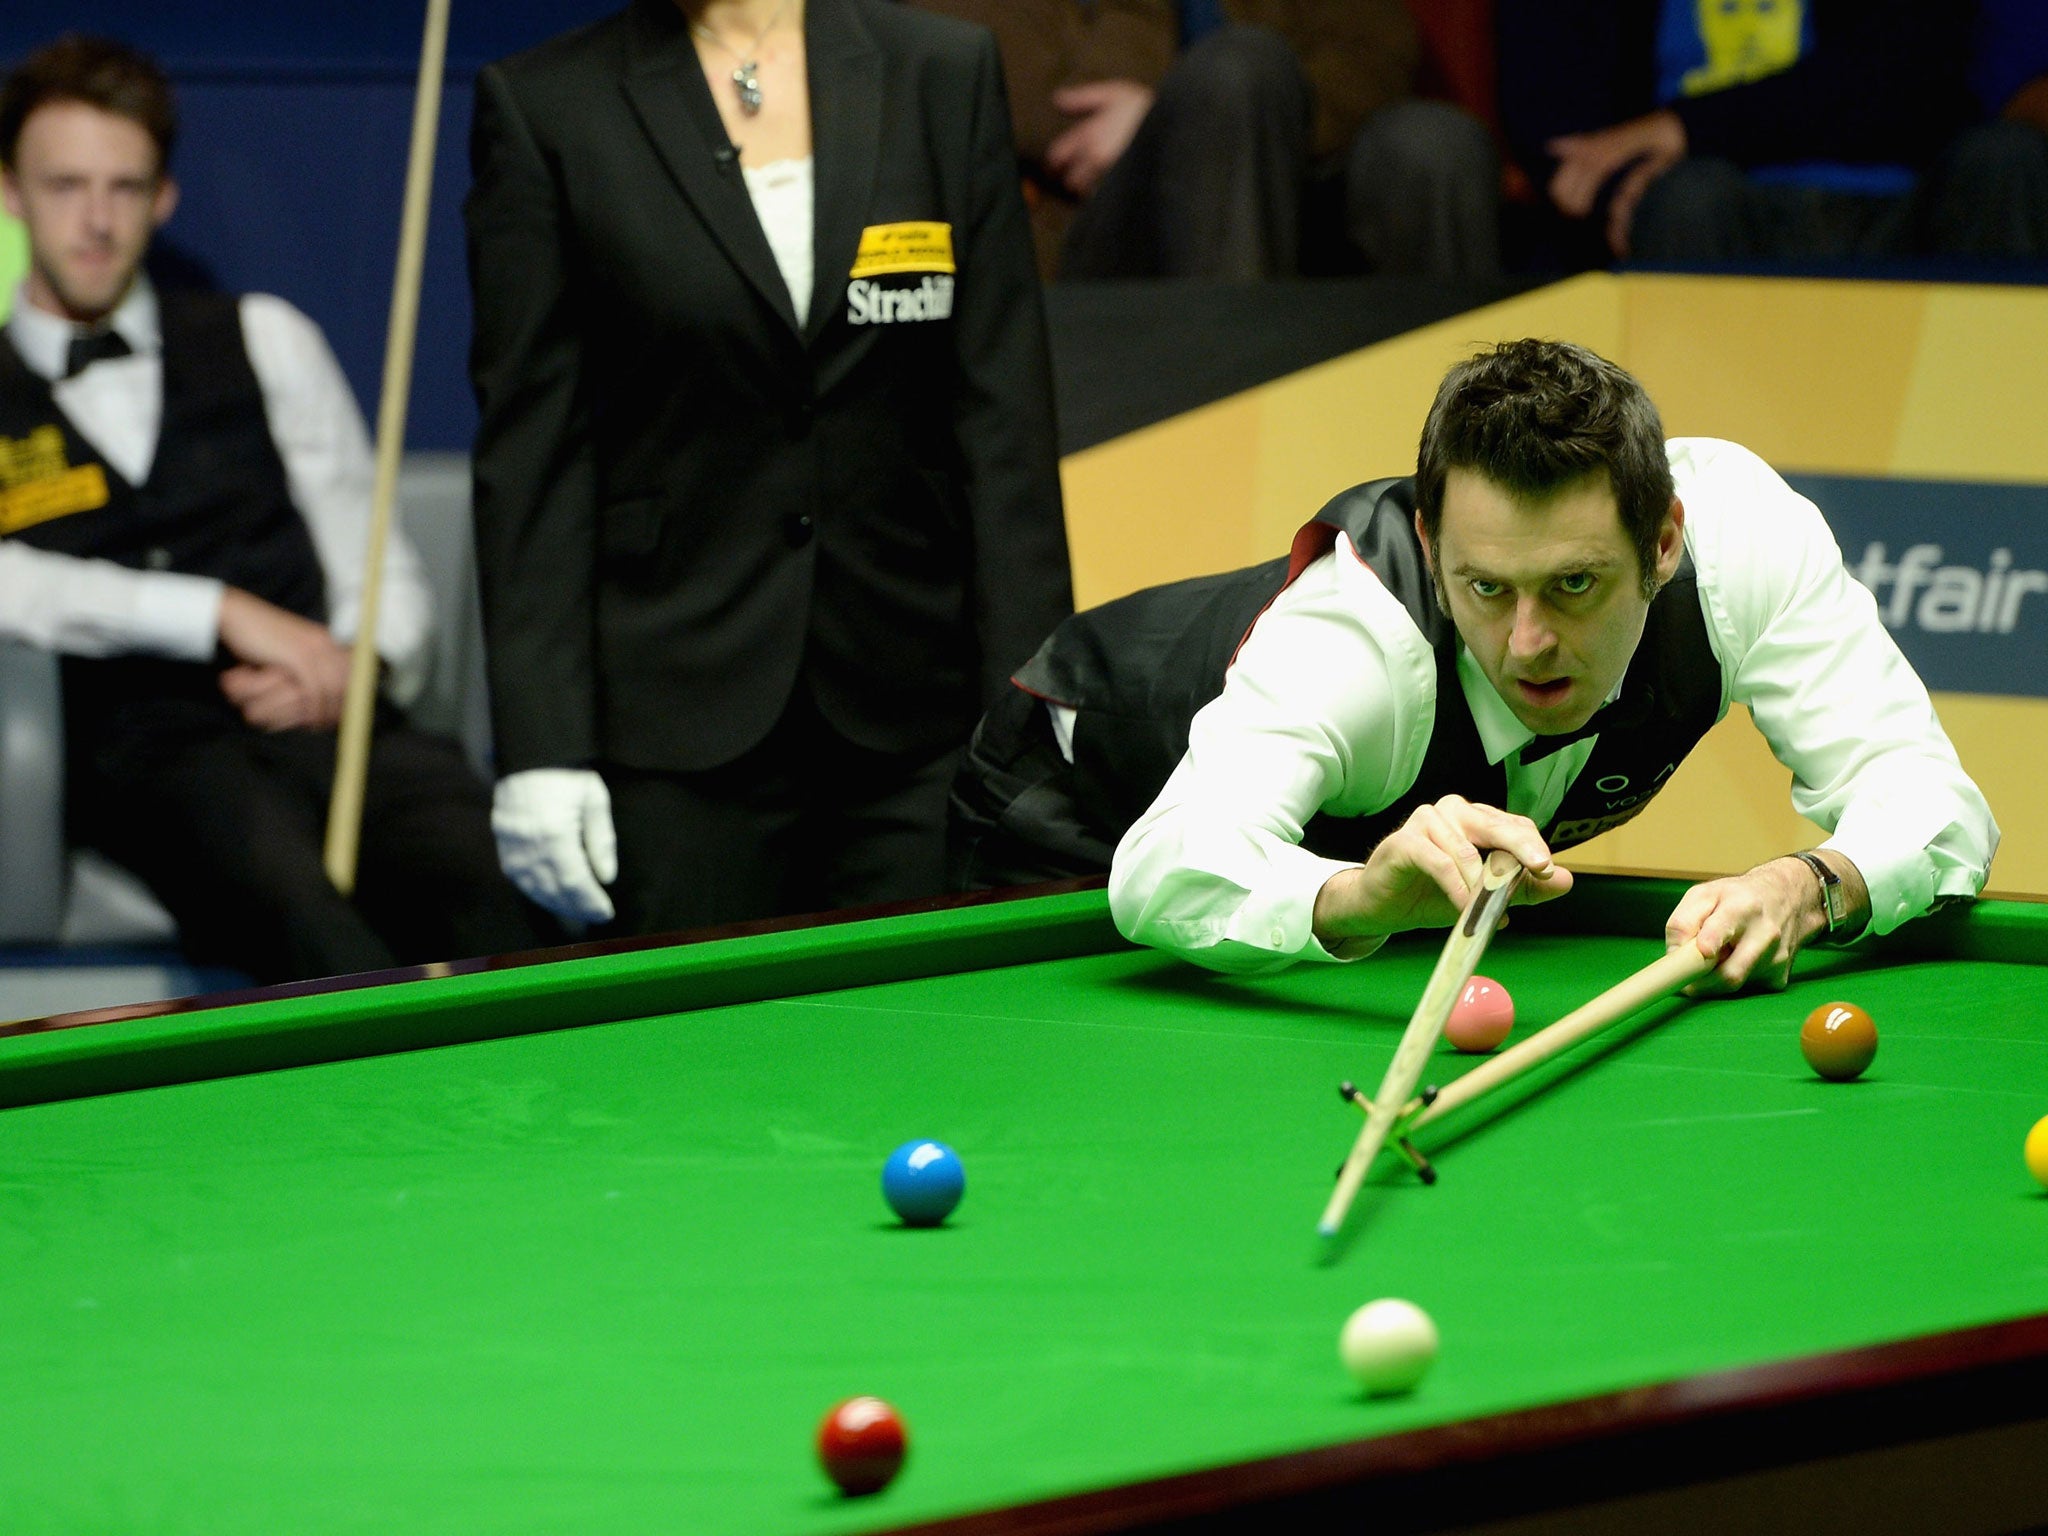 The defending champion Ronnie O’Sullivan in action yesterday